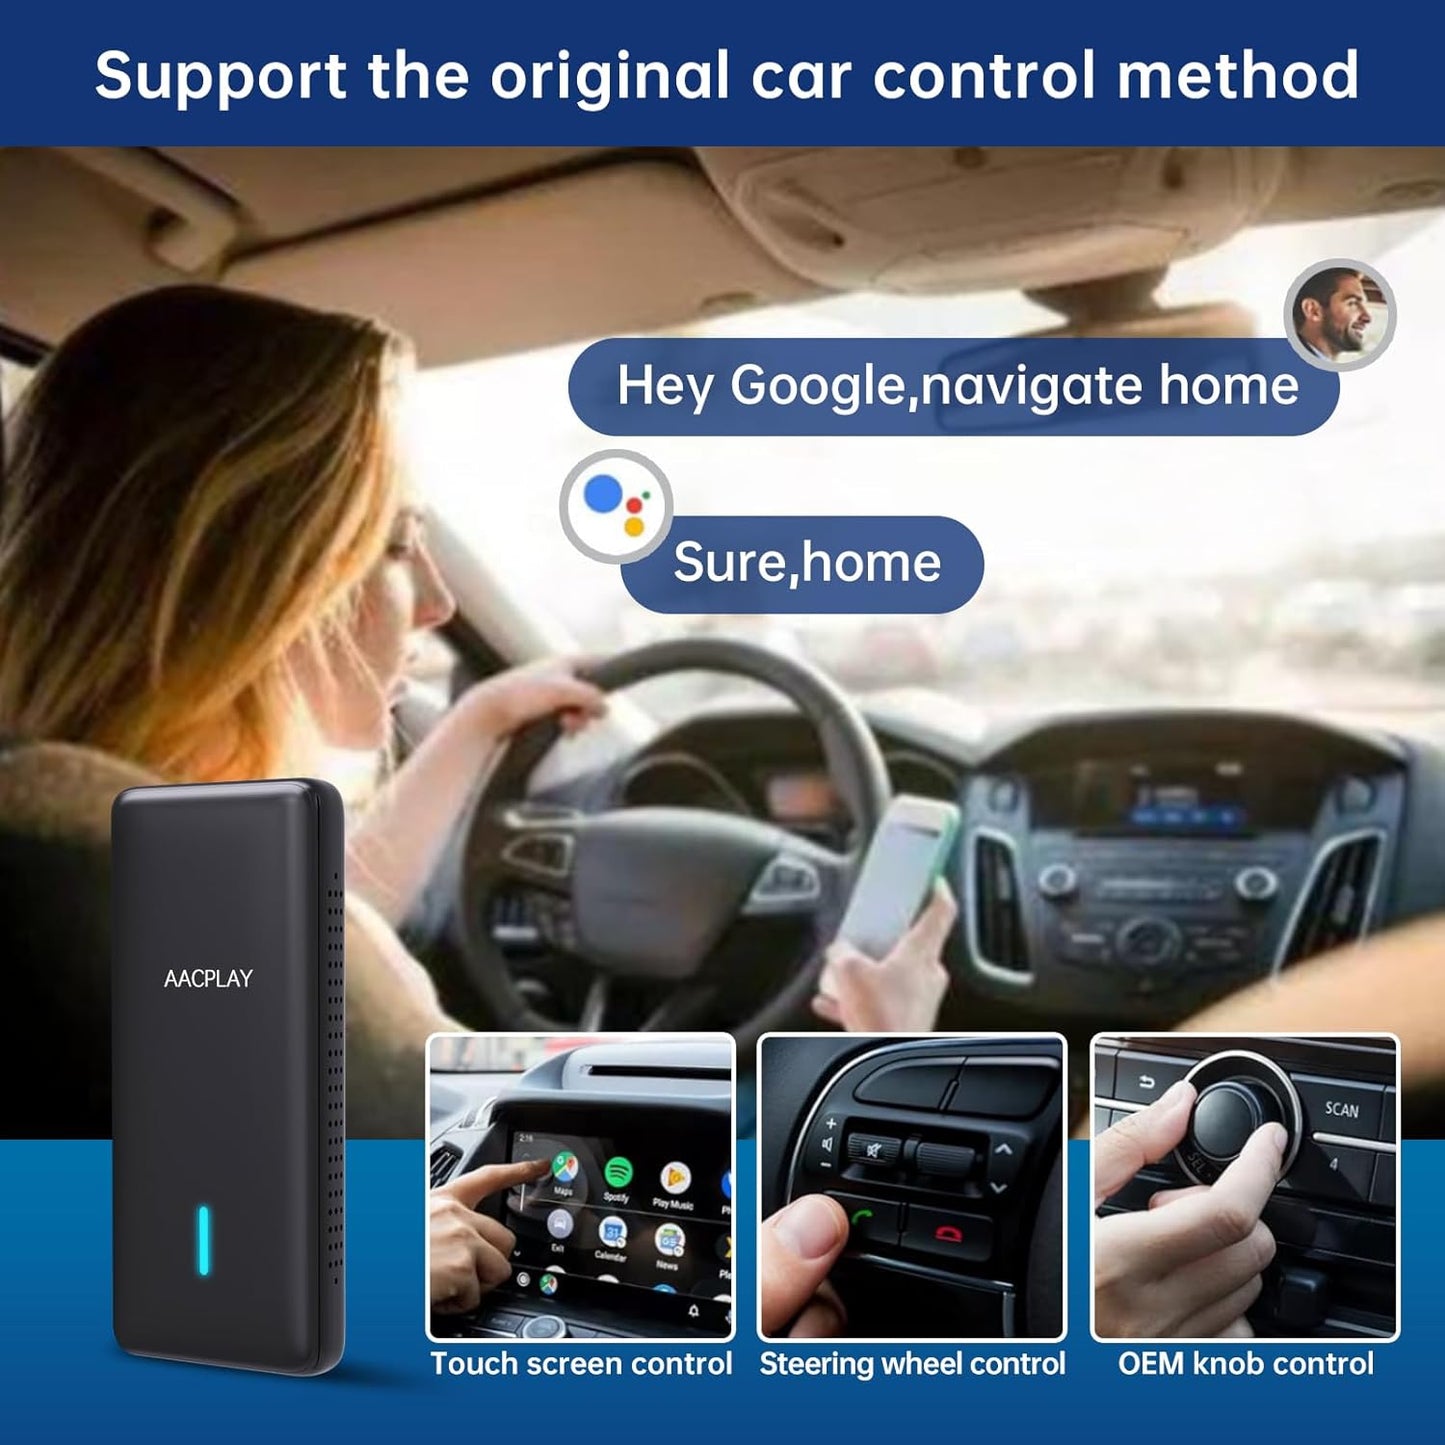 Android Auto Wireless Adapter for OEM Factory Wired AA Cars Plug & Play Easy Setup Wireless Android Auto Dongle for Android Phones Converts Wired Android Auto to Wireless